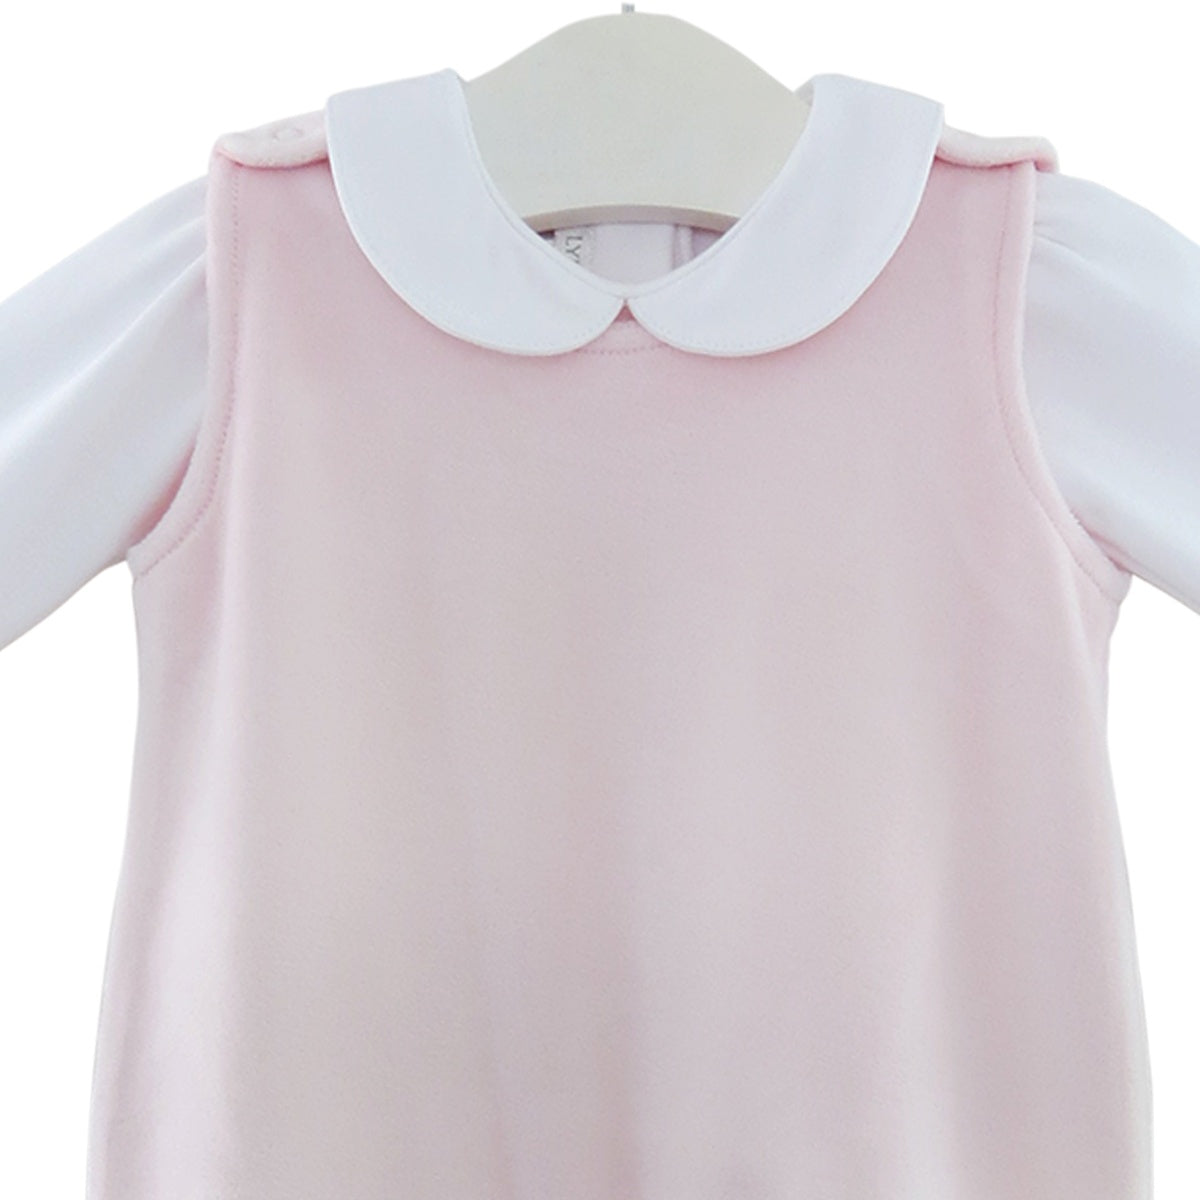 Pink and white pima cotton velour baby girl jumper - close up